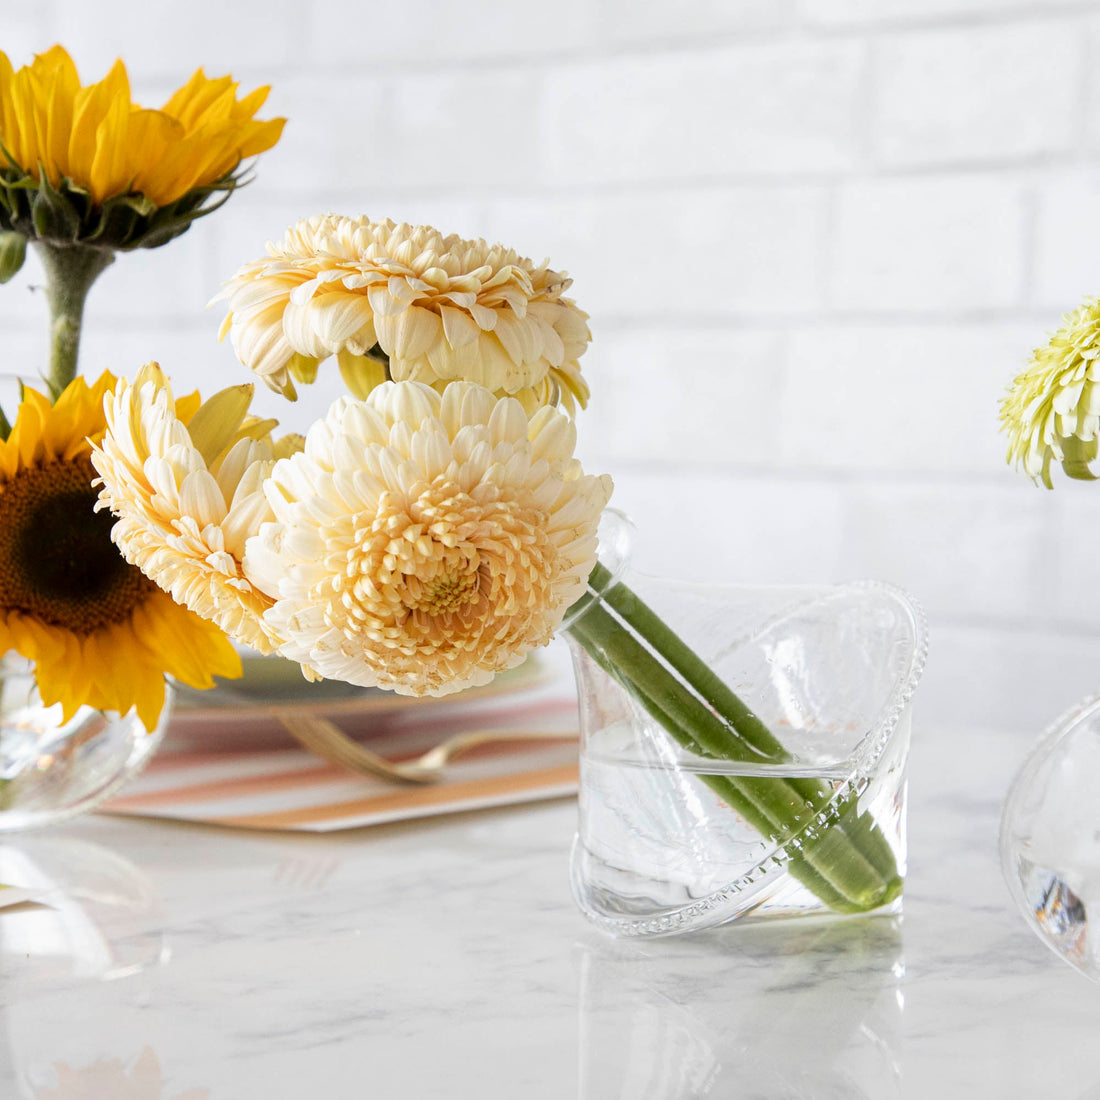 Three Qualia Mouth Blown Clear Vases - Exclusively at Hester &amp; Cook with small bouquets of favorite flowers sitting on a table.